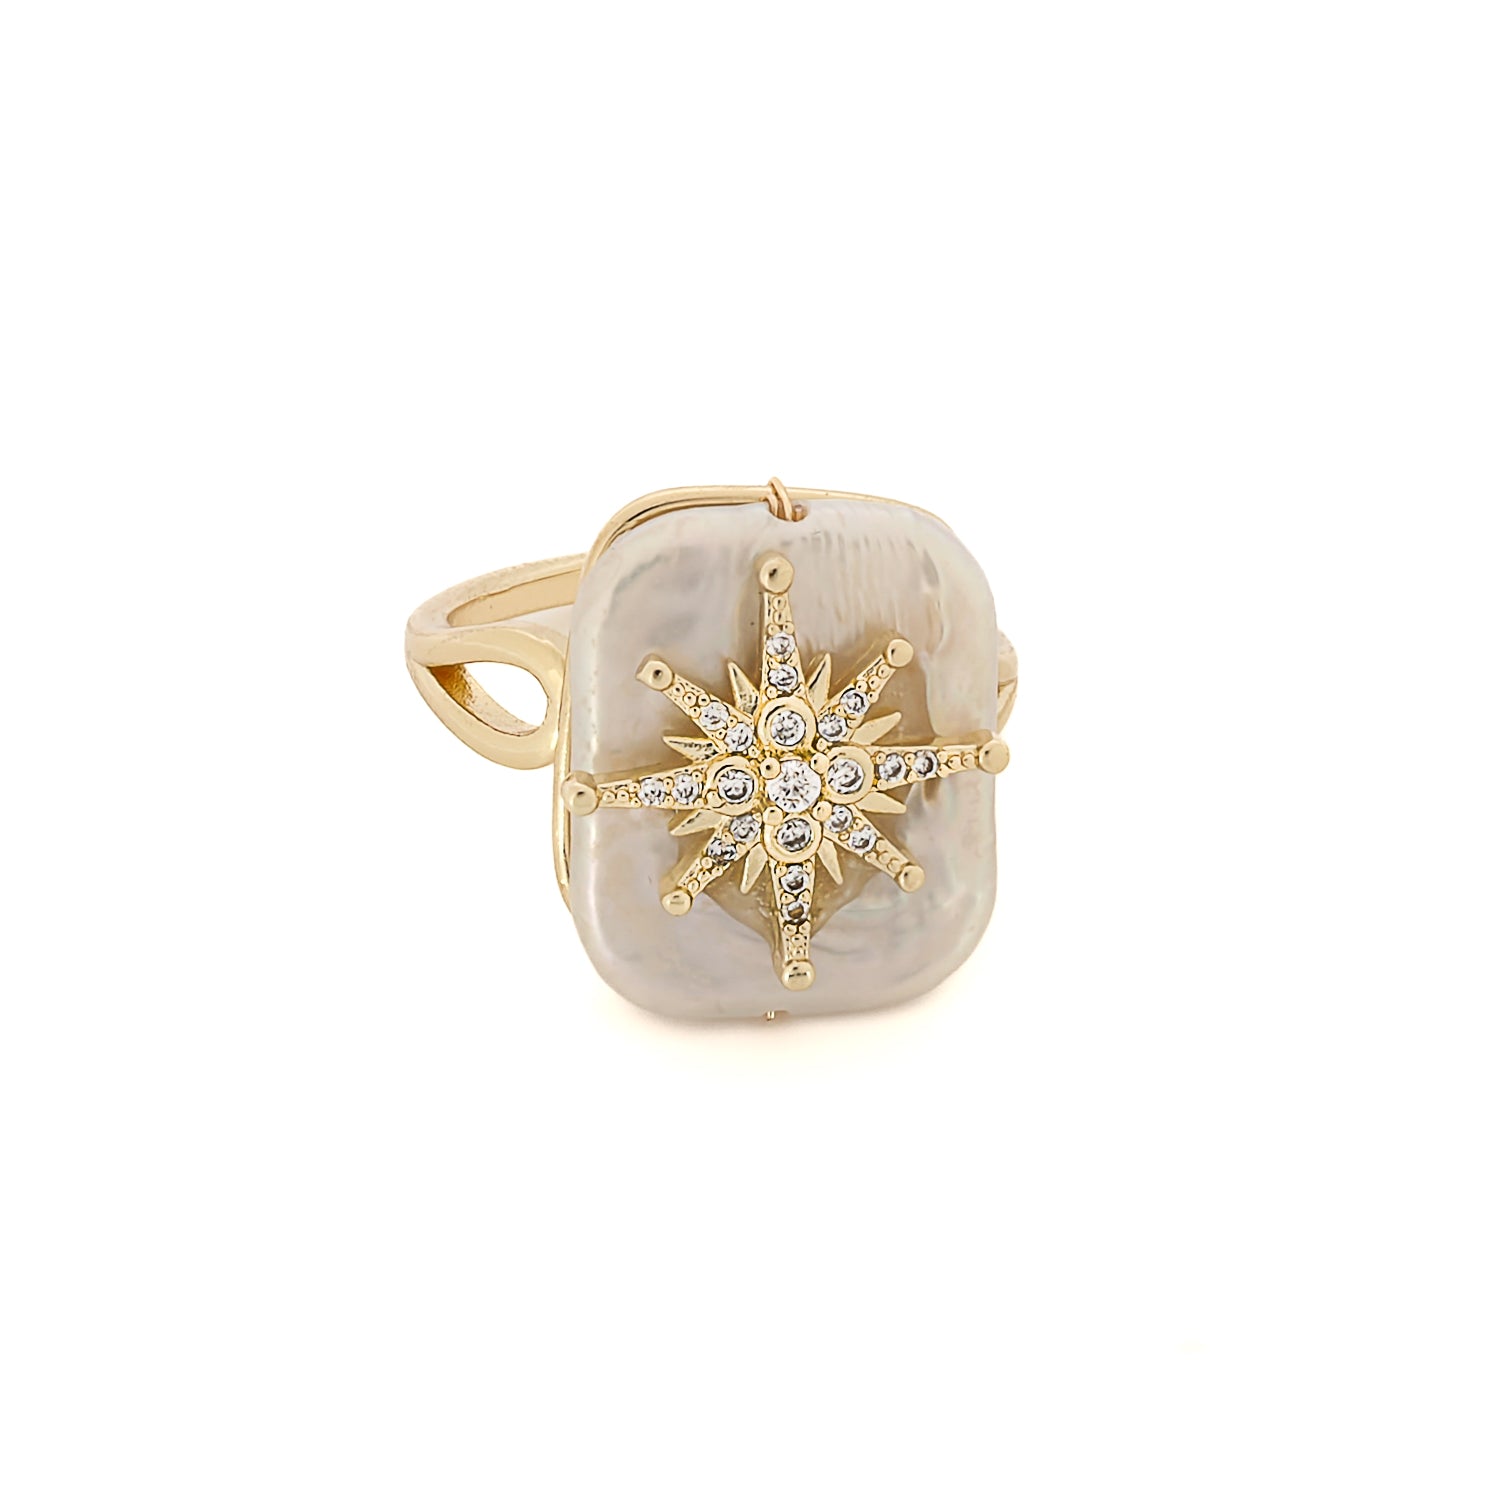 Elevate your style with the elegance of a handcrafted pearl cocktail ring.